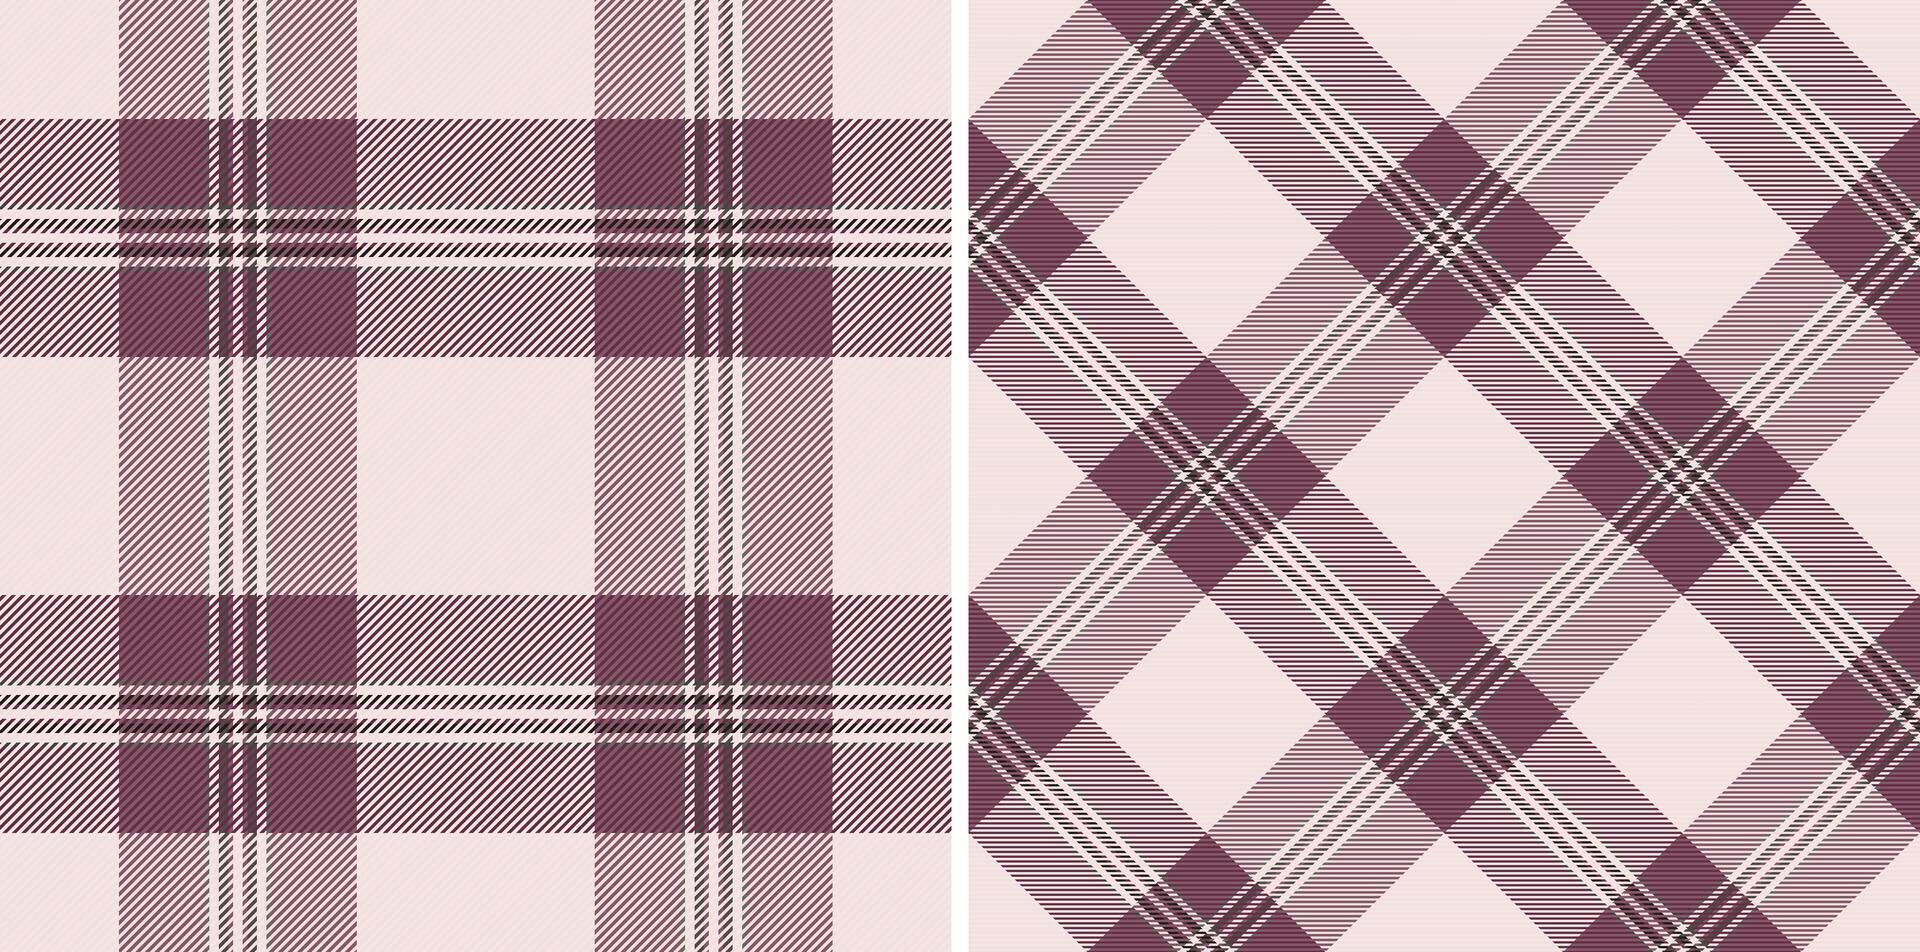 Tartan fabric pattern of textile background vector with a plaid check seamless texture. Set in fashionable colors. Herringbone patterns in fashion and design.